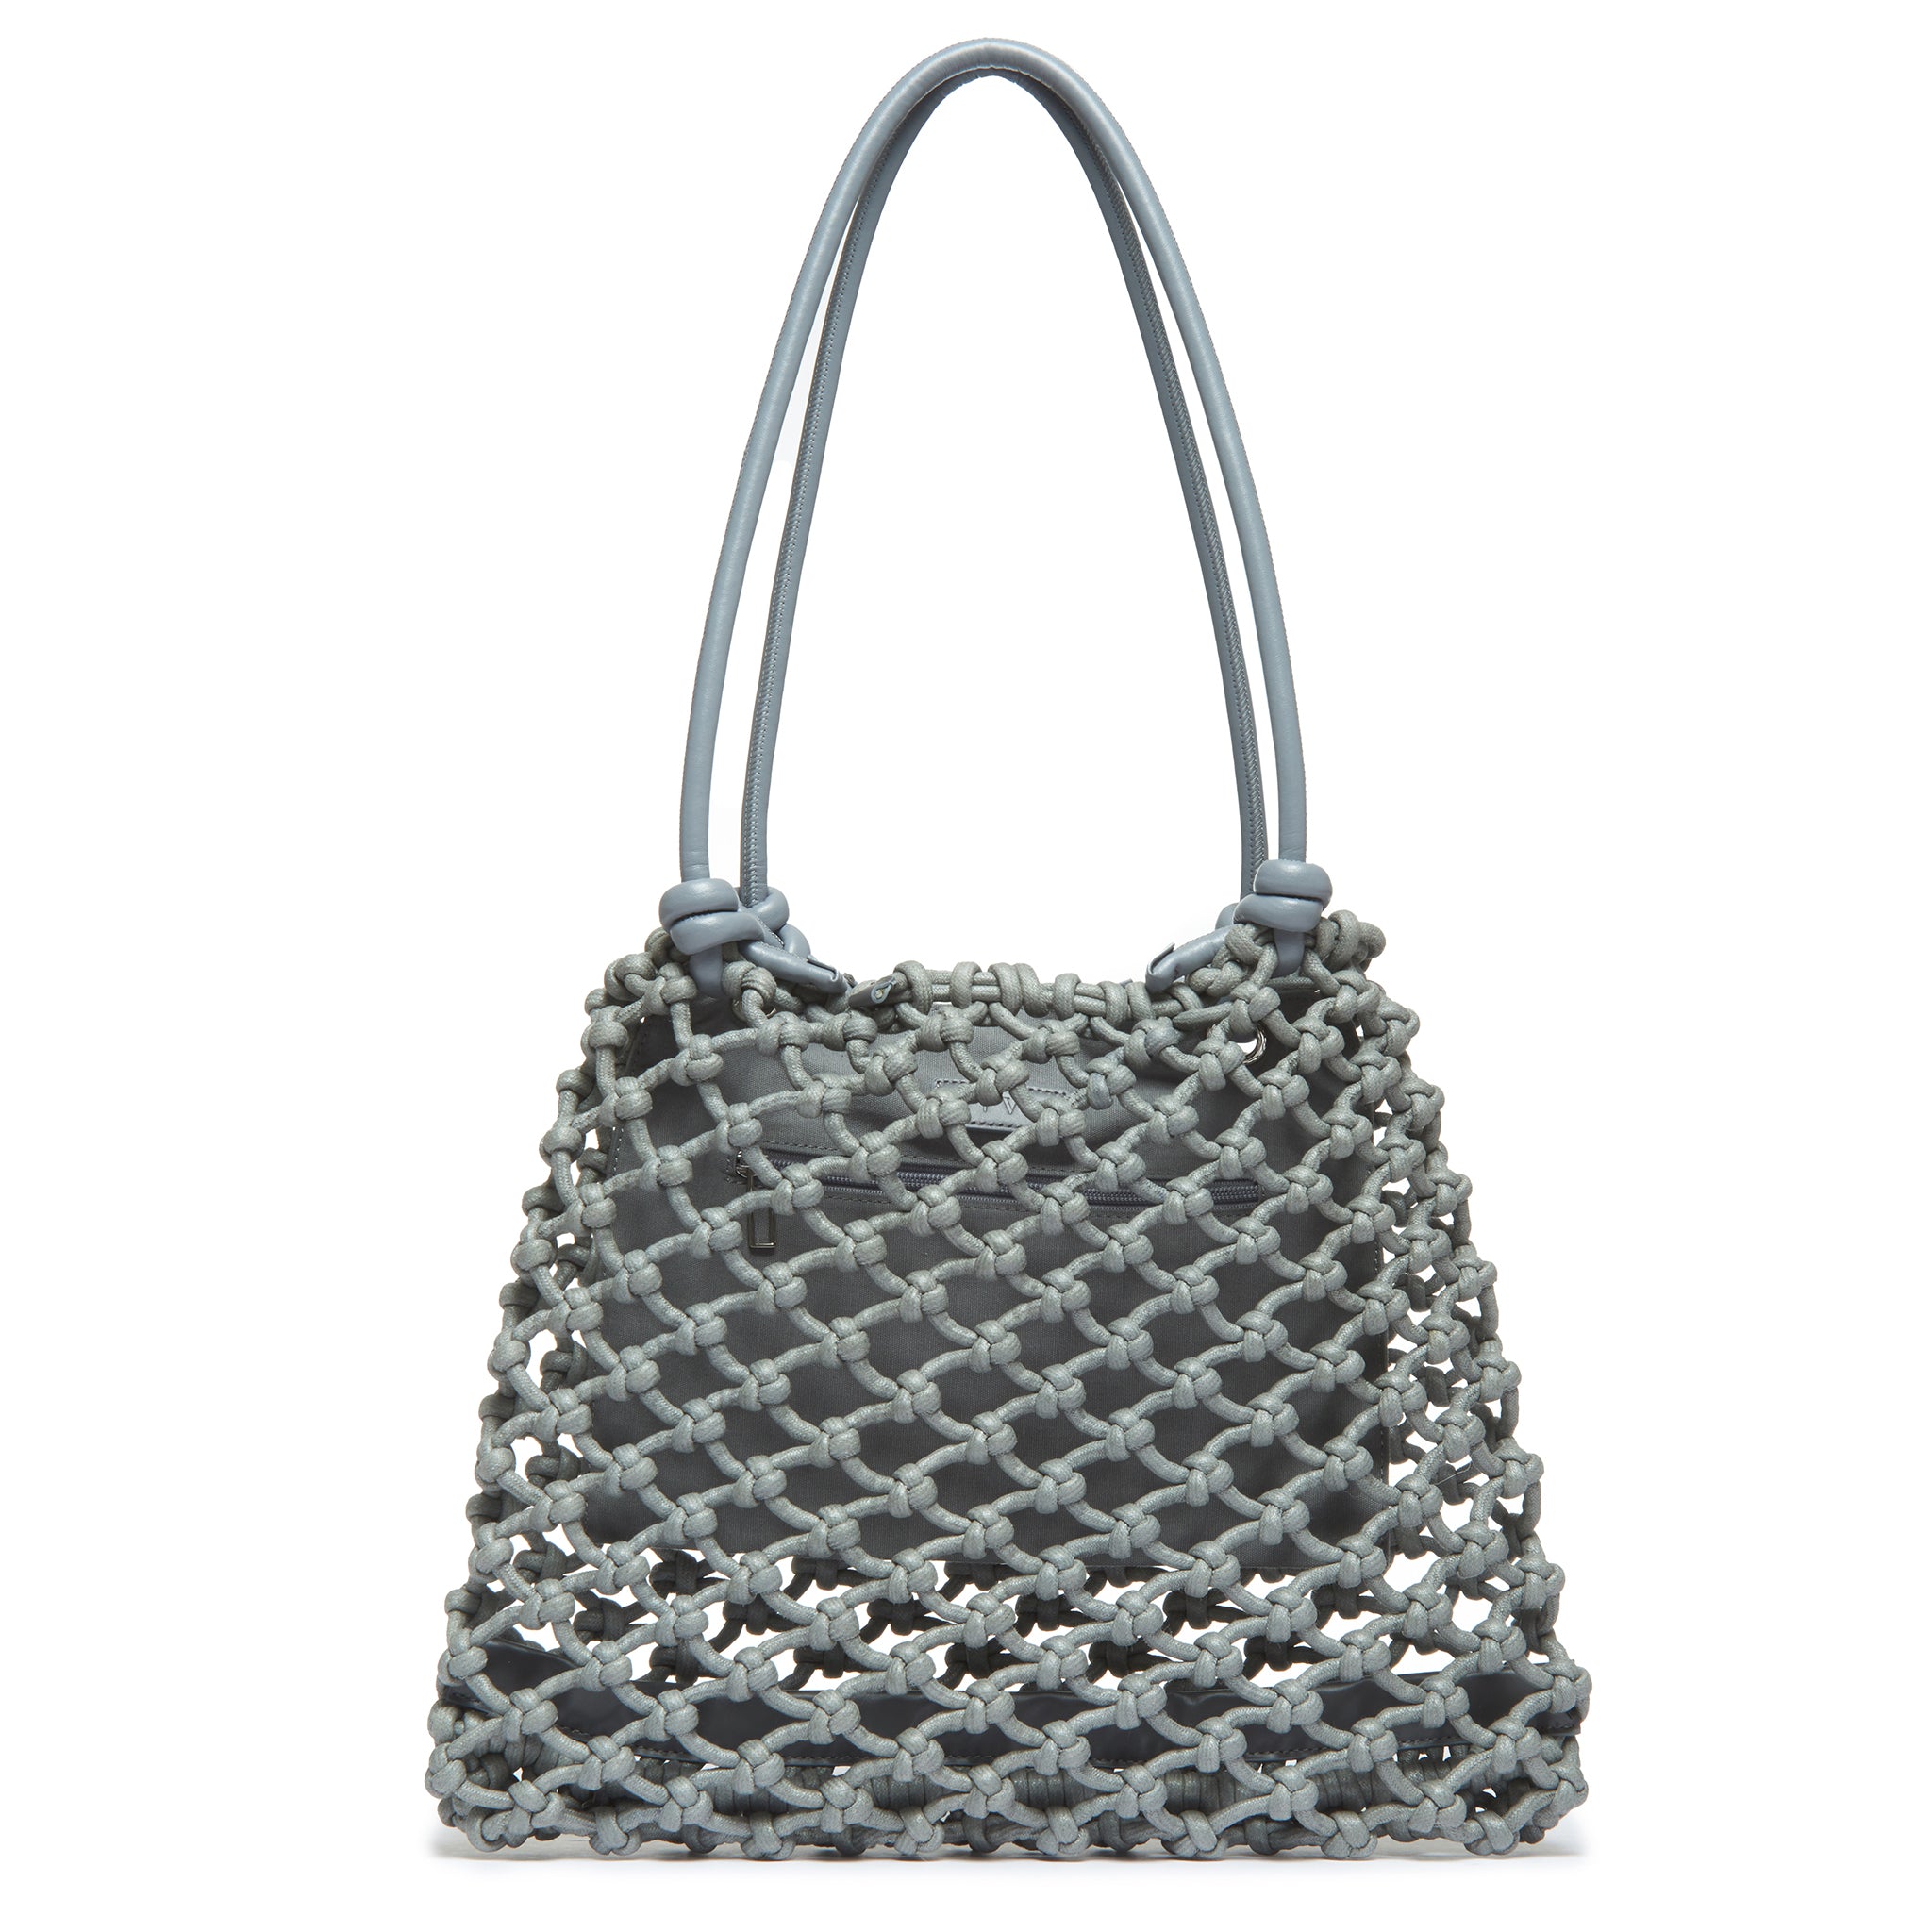 Isa knotted tote bag leather handles